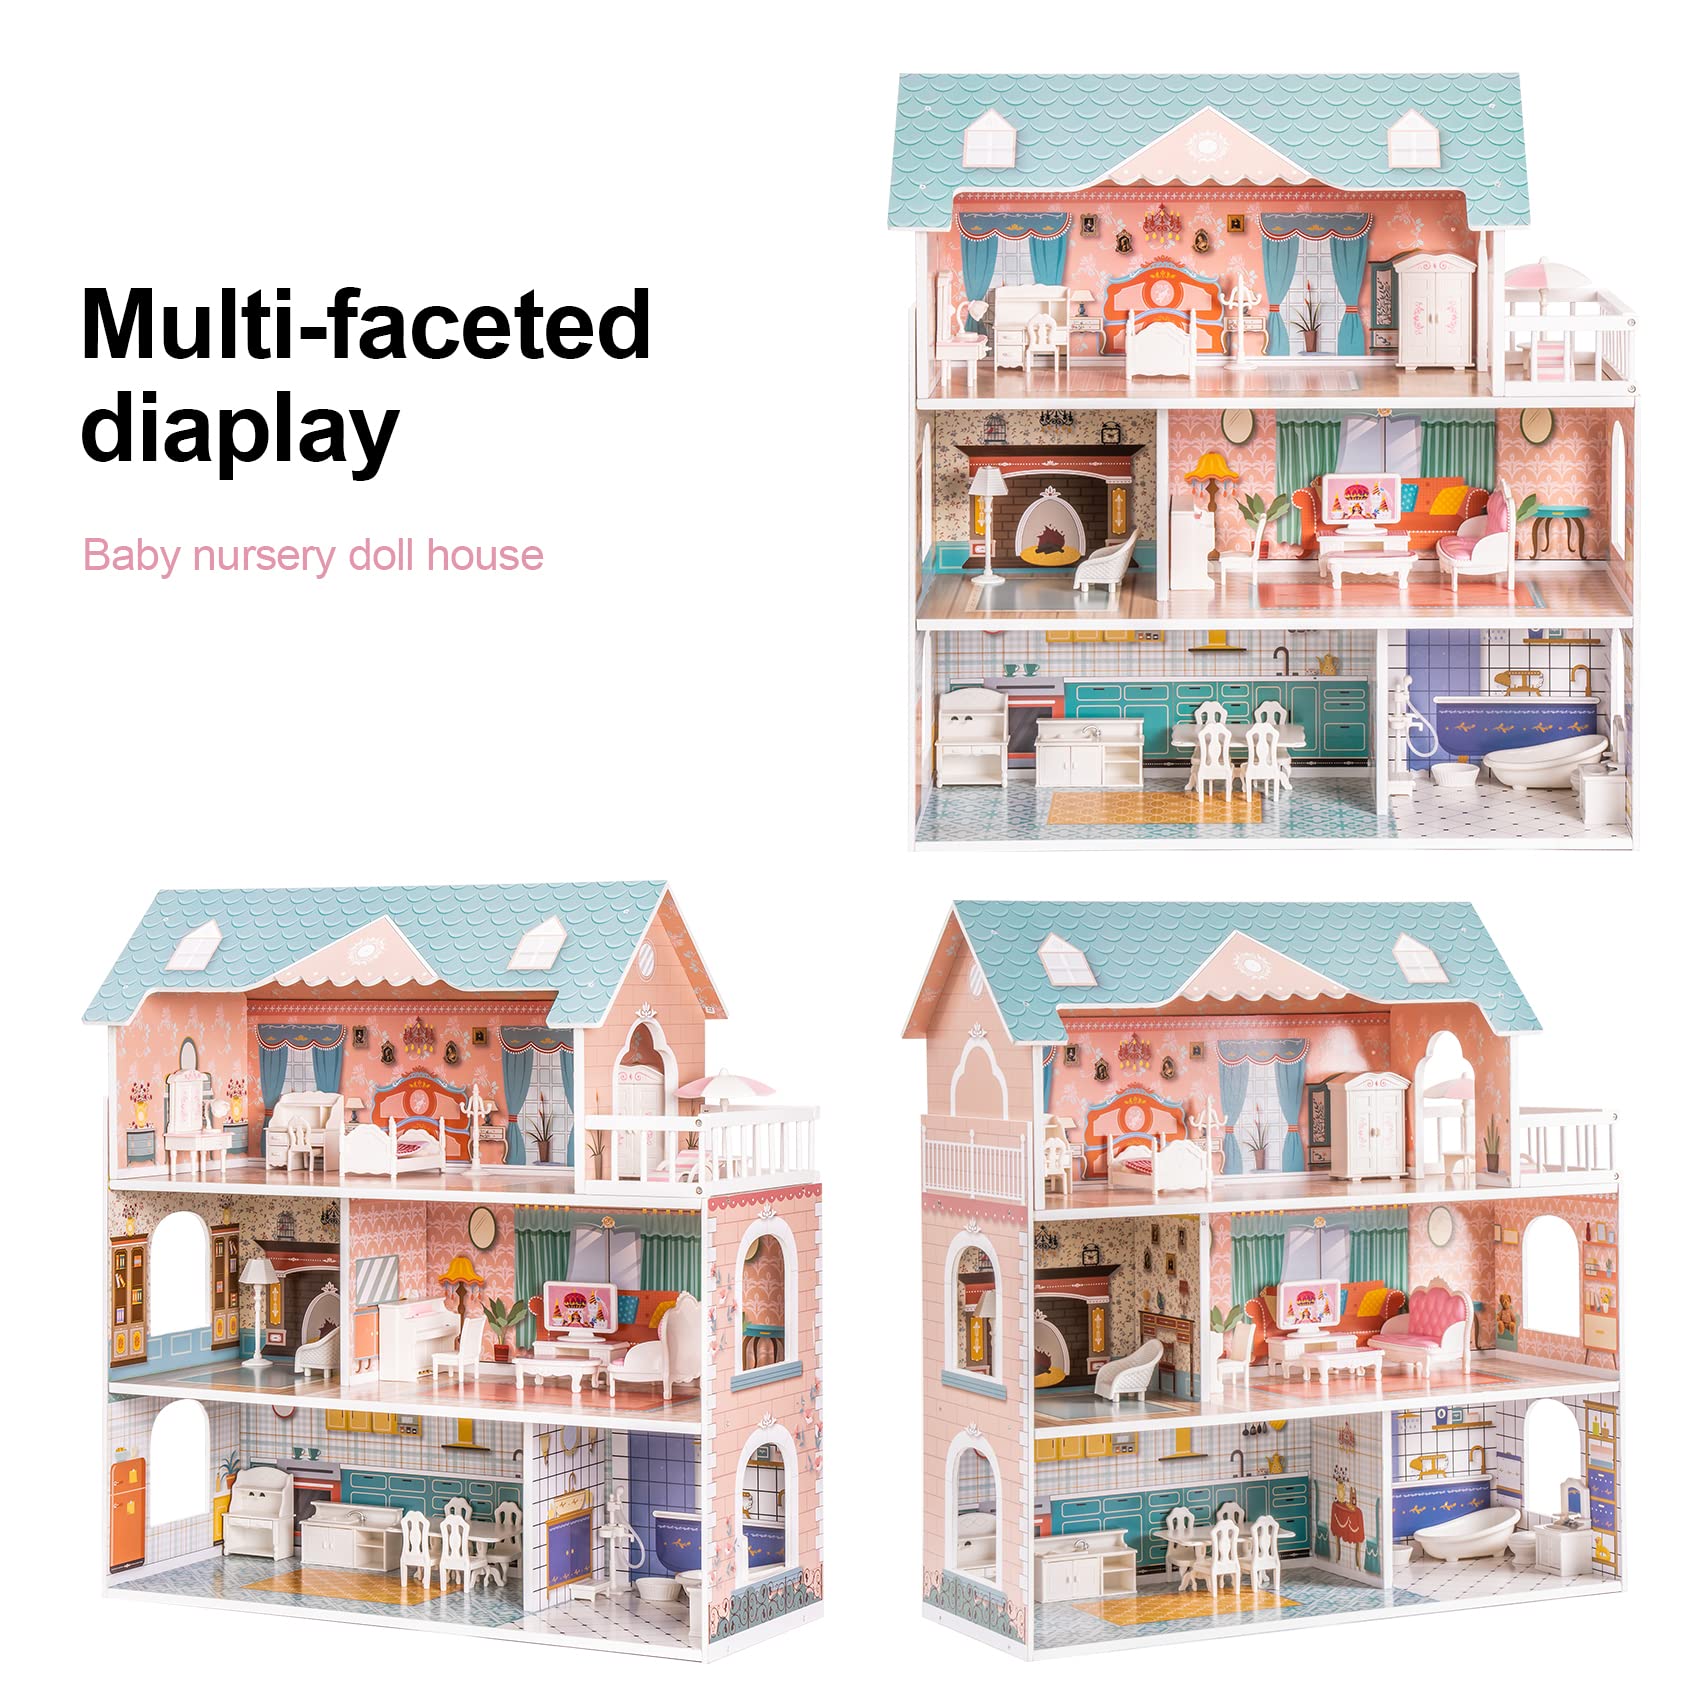 ROBUD Wooden Dollhouse for Kids Girls, Toy Gift for 3 4 5 6 Years Old, with Furniture